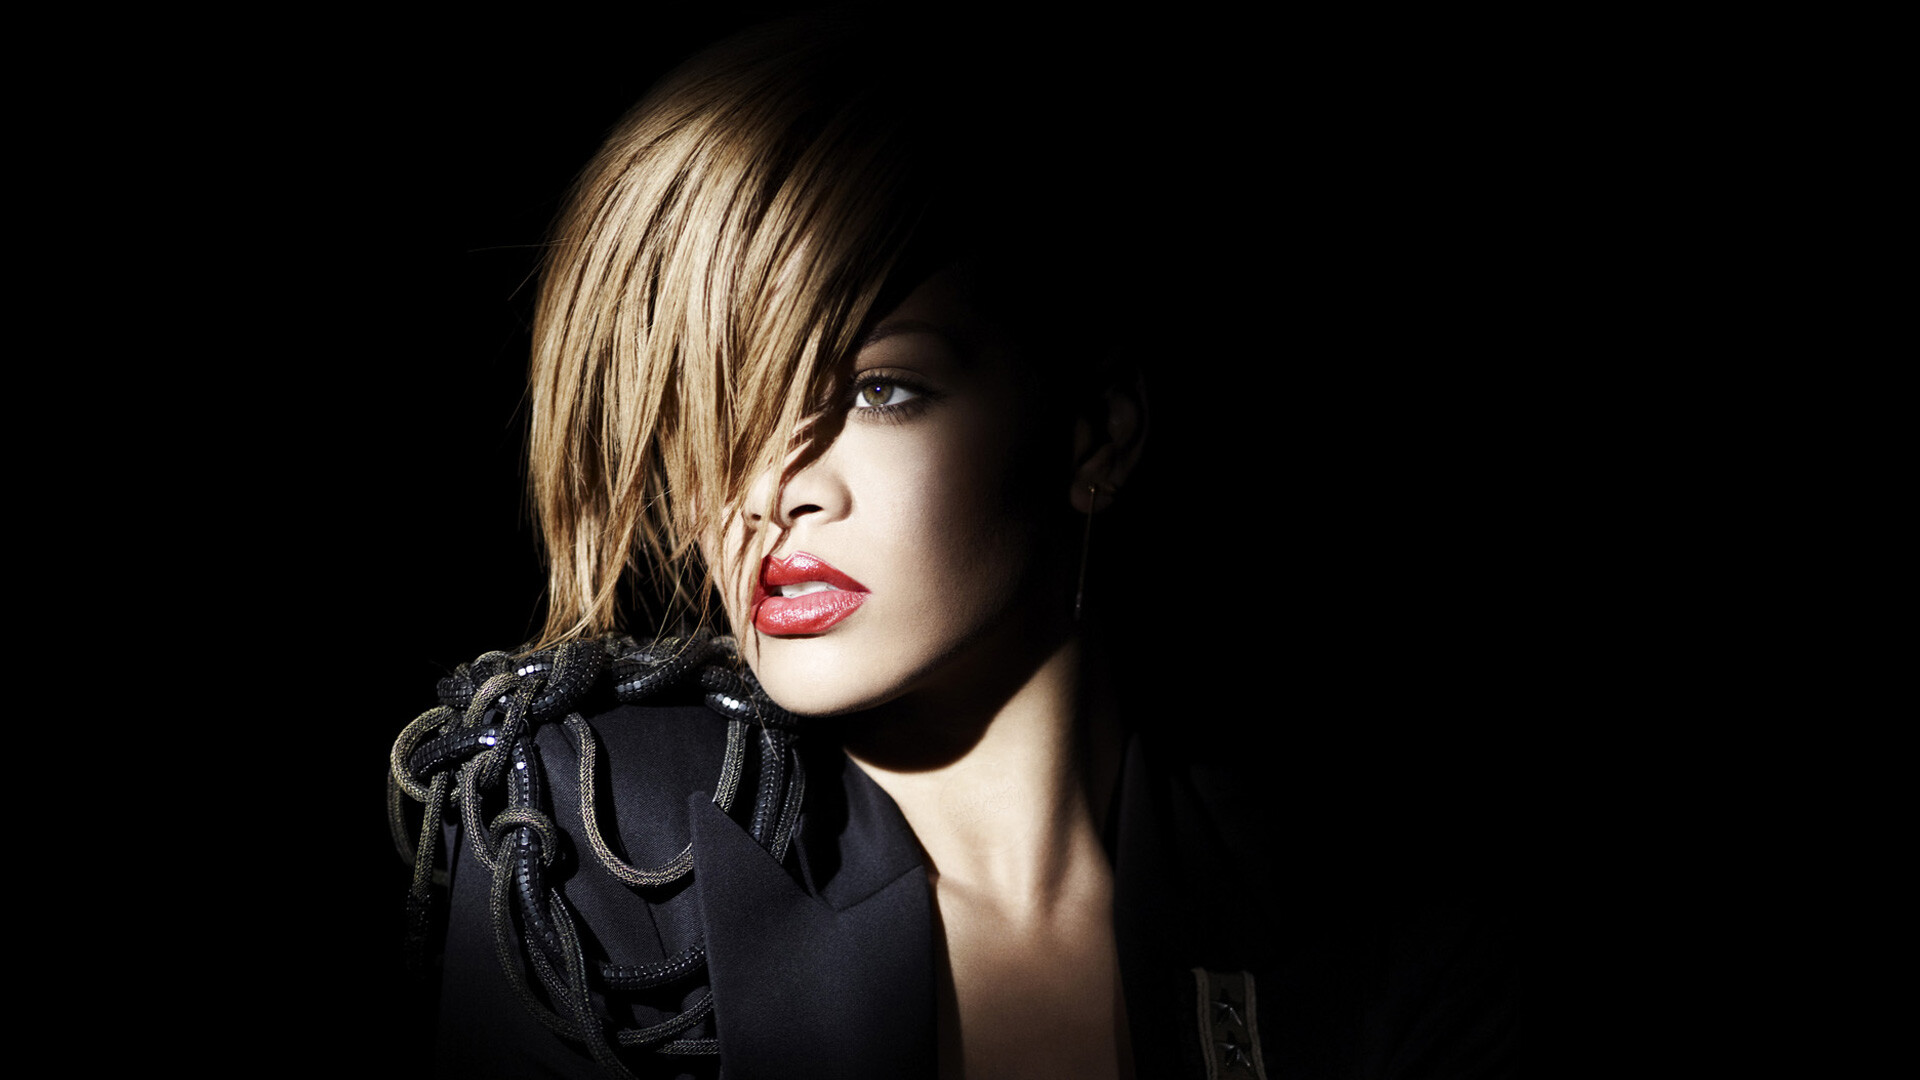 Rihanna: Rated R, Released on November 20, 2009 by Def Jam and SRP. 1920x1080 Full HD Background.